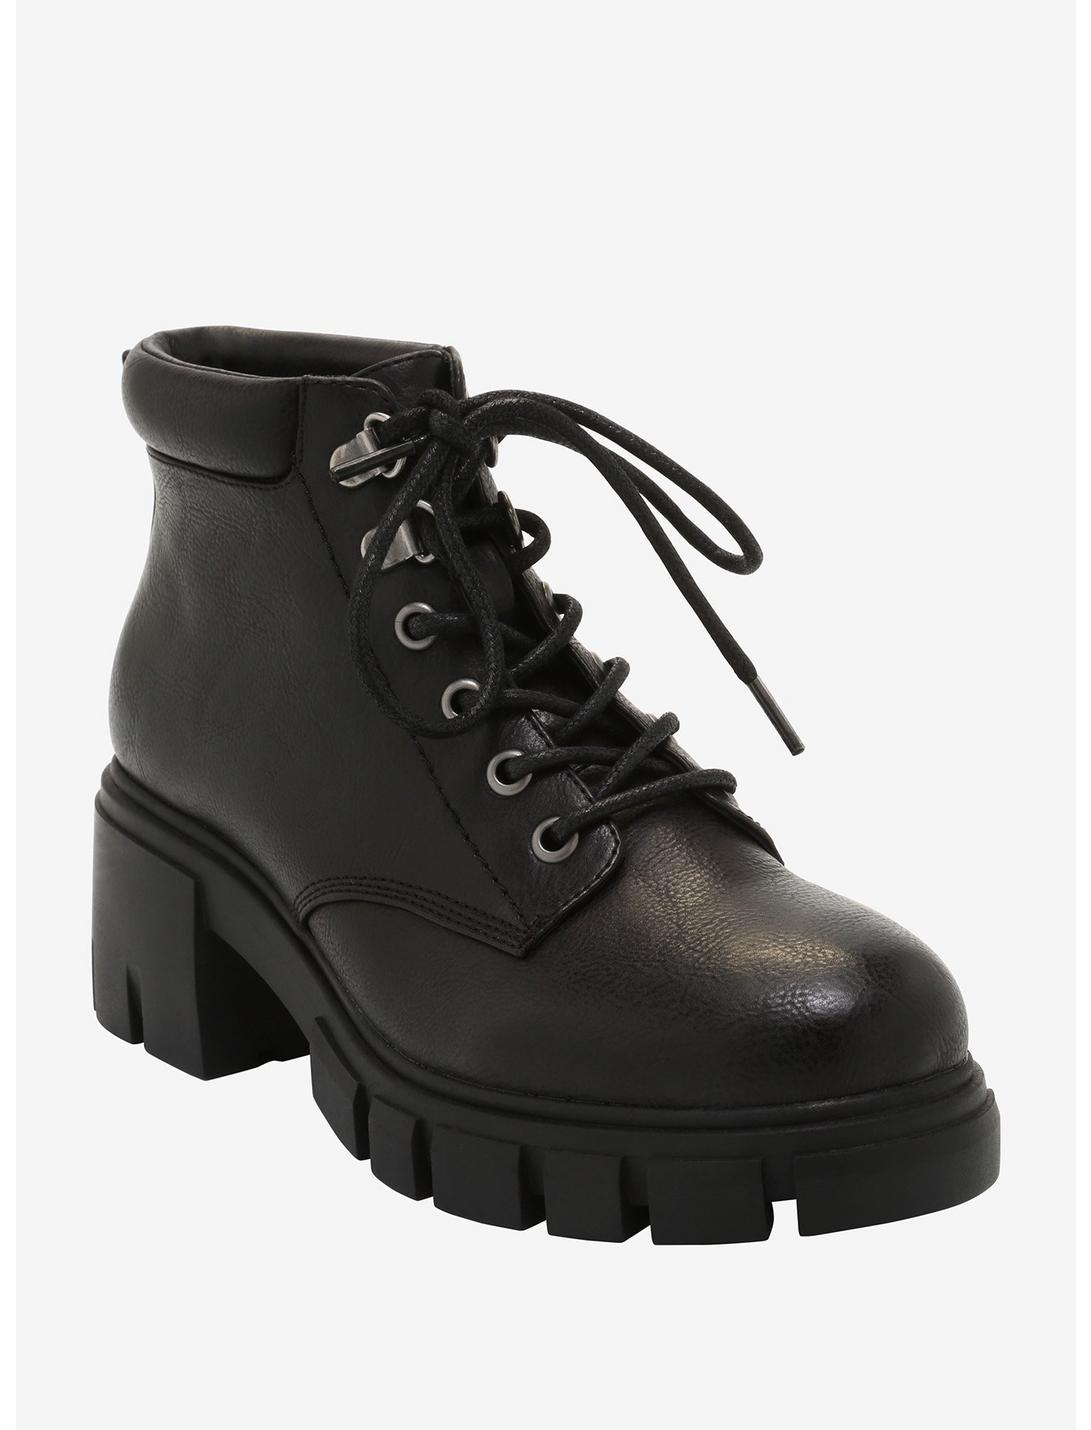 Black Faux Leather Lace-Up Heeled Ankle Boots, MULTI, hi-res